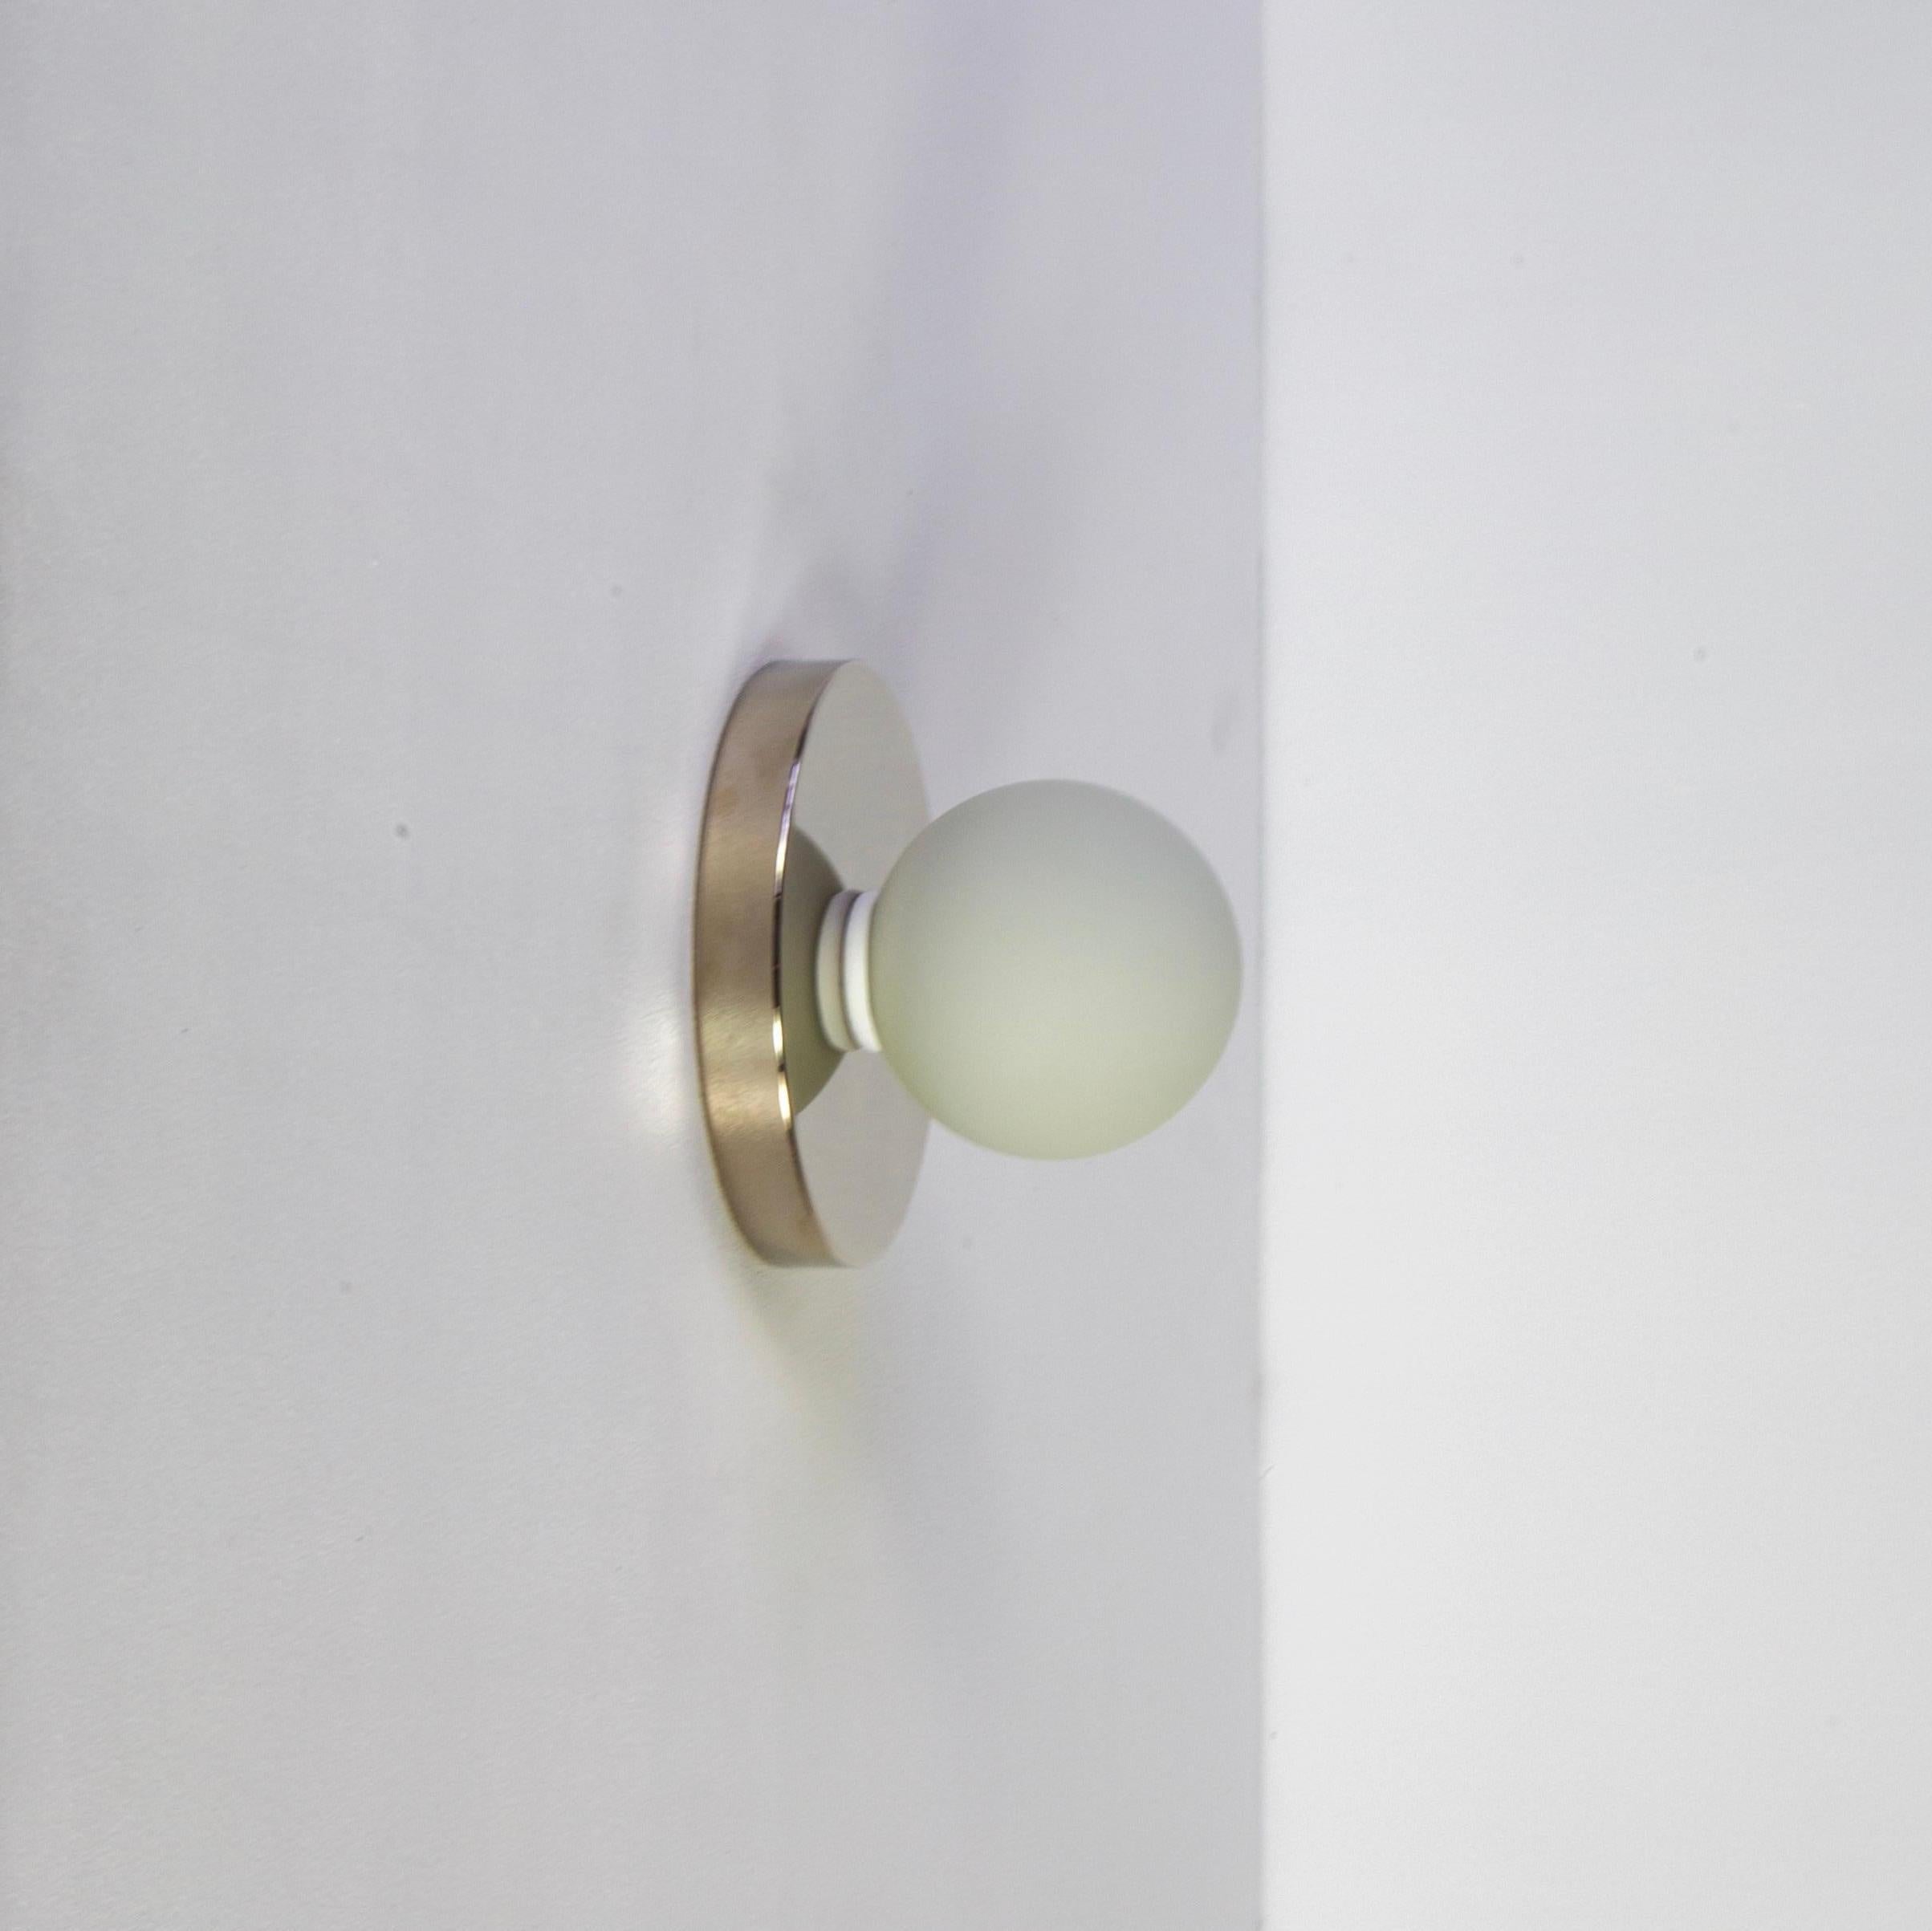 American Globe Sconce by Research.Lighting, Polished Nickel, Made to Order For Sale